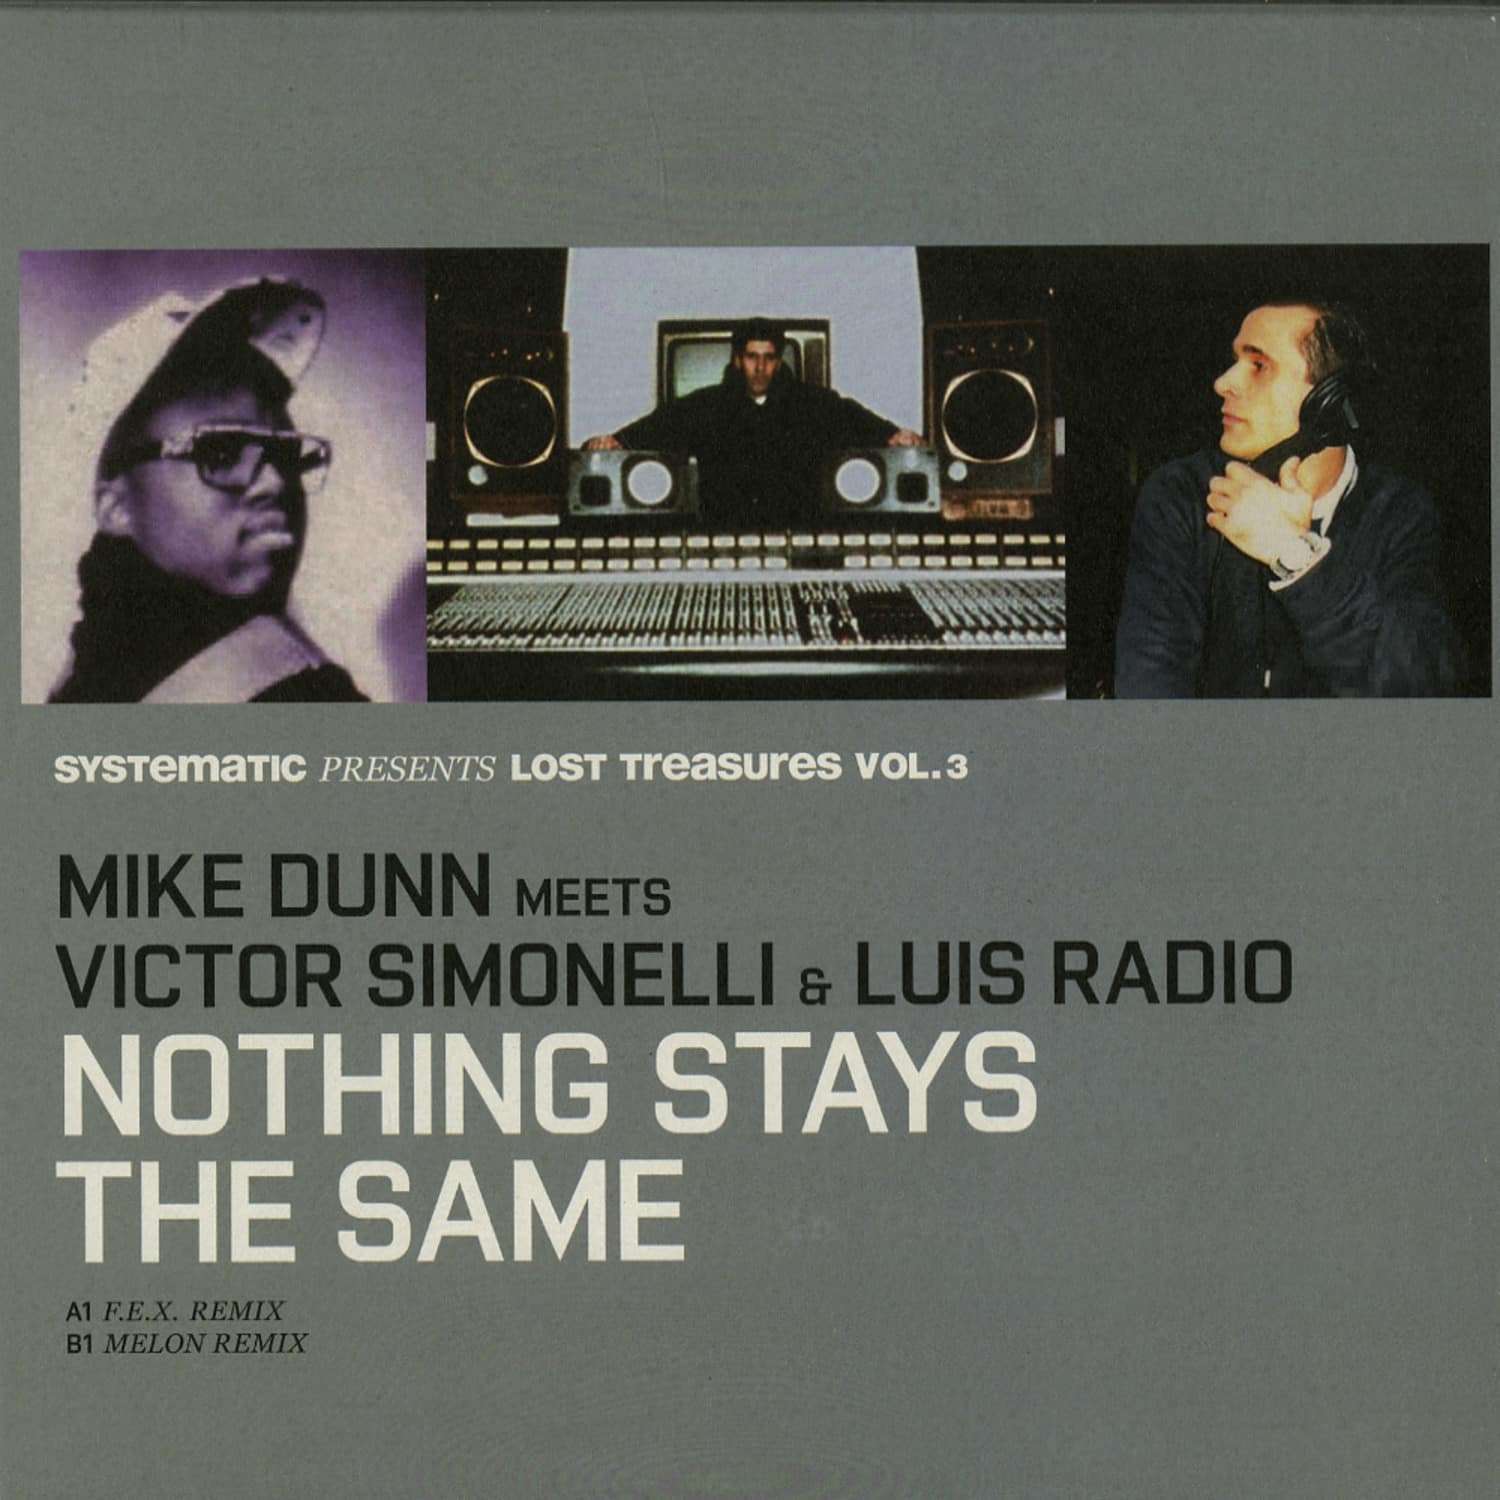 Mike Dunn meets Victor Simonelli & Luis Radio - NOTHING STAYS THE SAME 